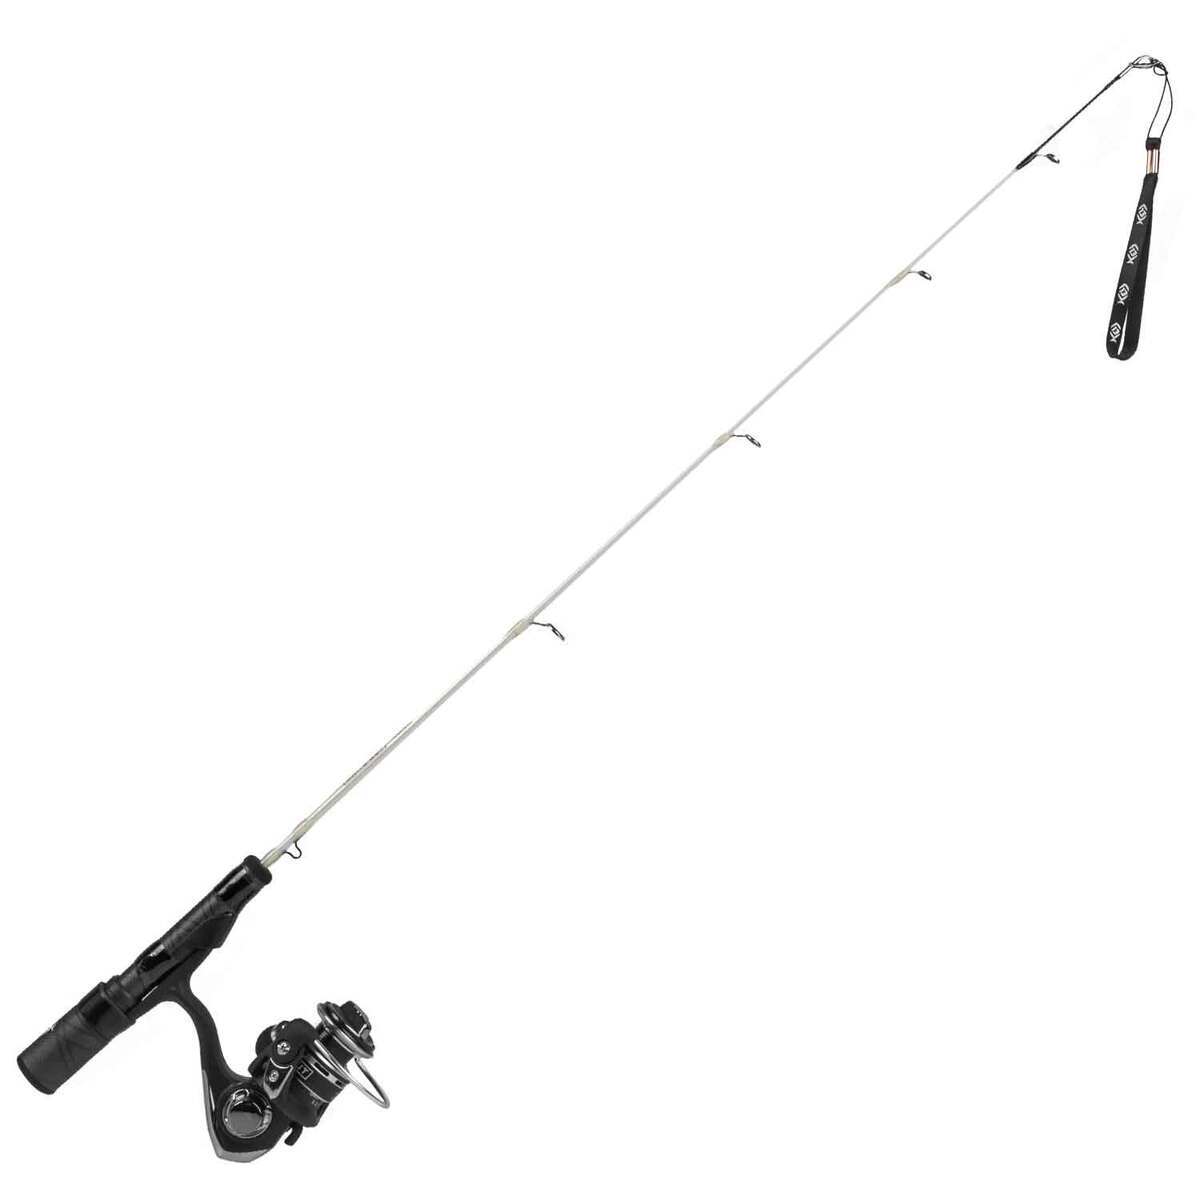 13 Fishing Whiteout Ice Fishing Spinning Rod and Reel Combo - 27.5